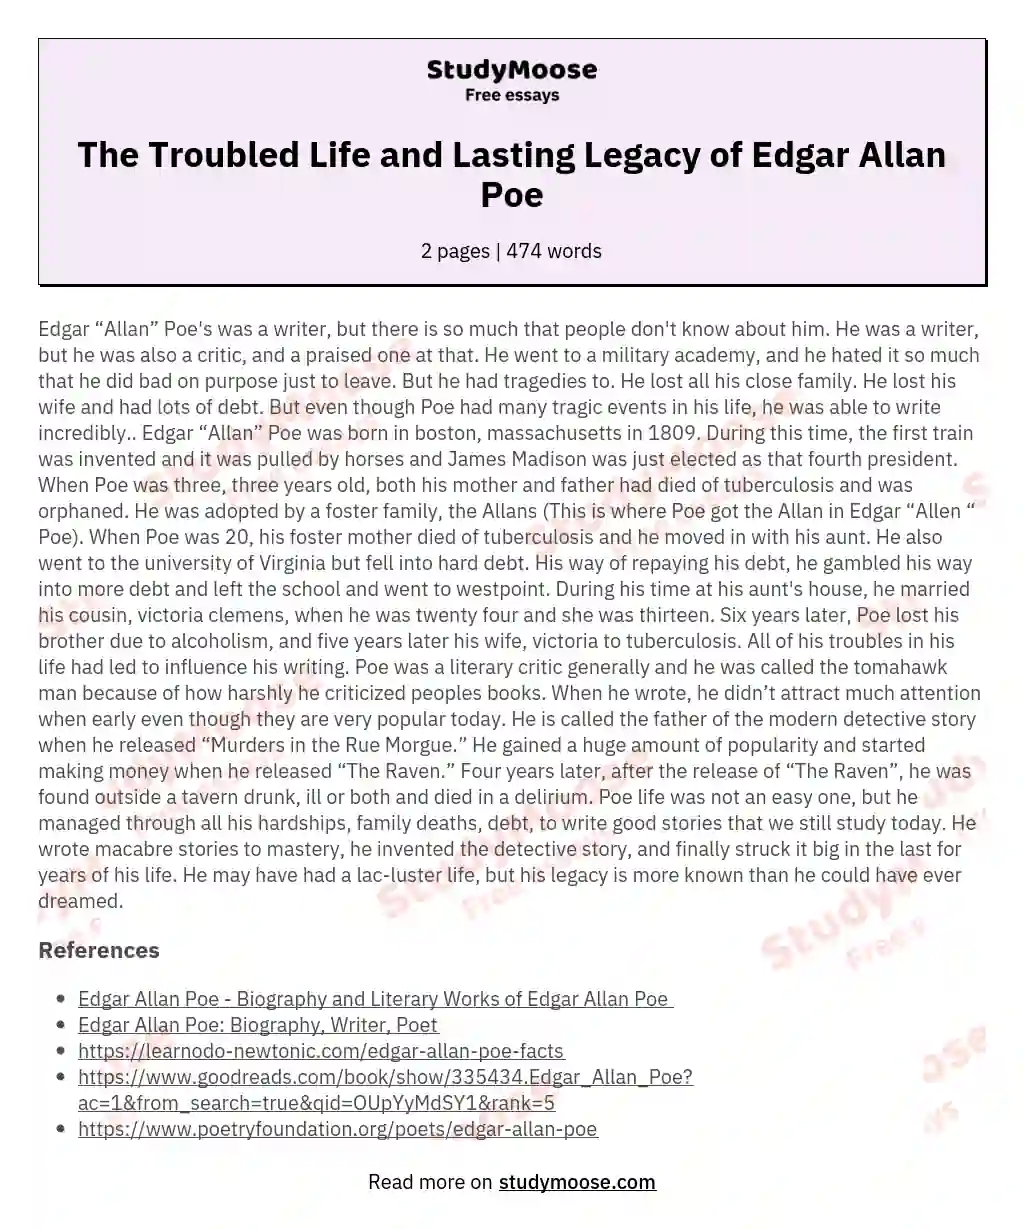 The Troubled Life and Lasting Legacy of Edgar Allan Poe essay